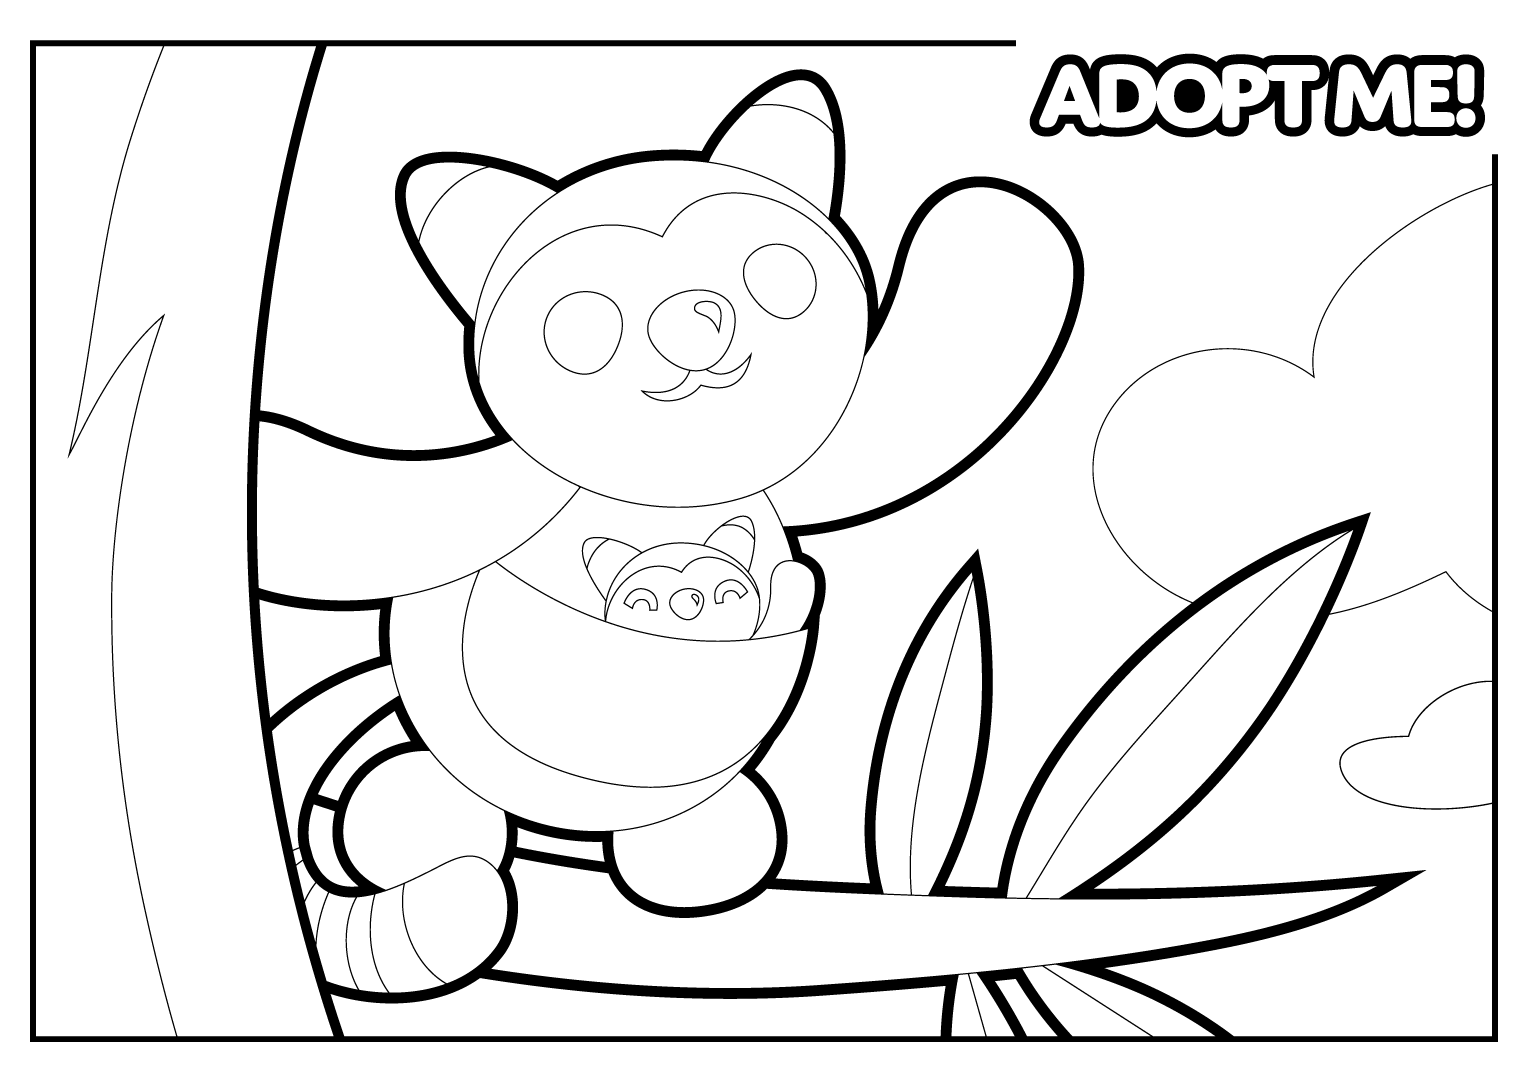 Roblox Adopt Me Coloring Pages Starfish - XColorings.com